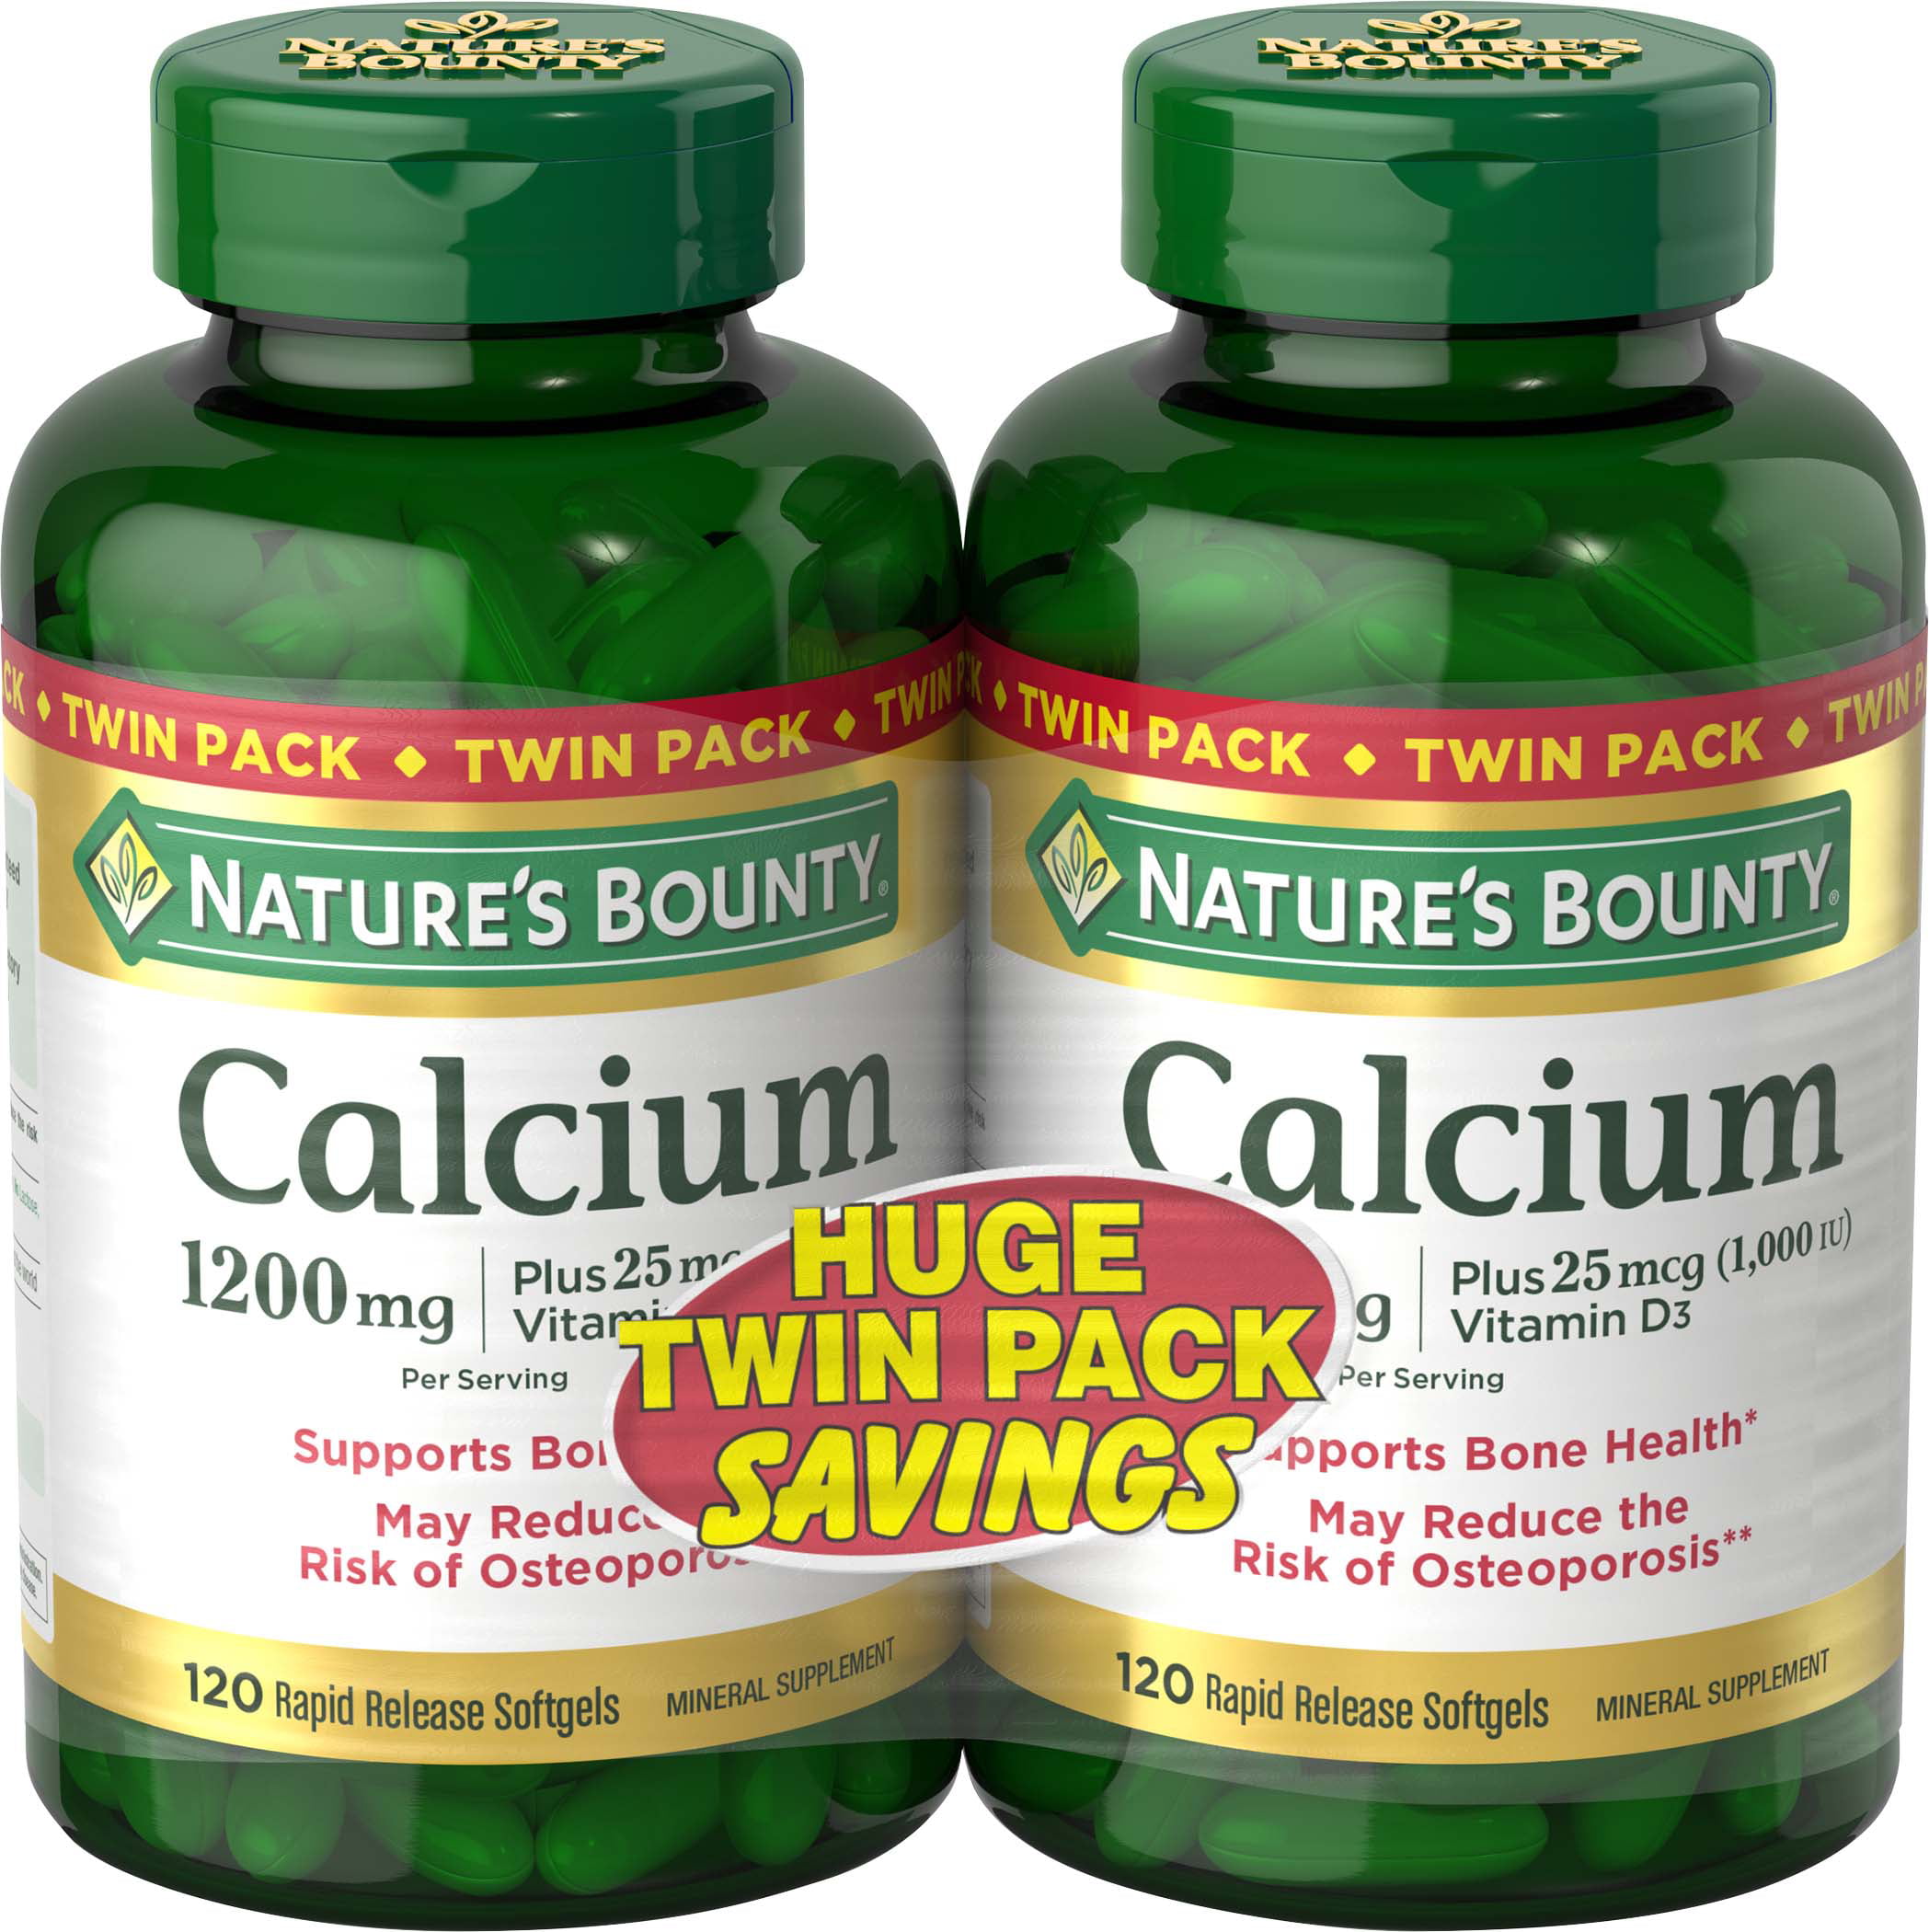 Natures Bounty Absorbable Calcium 1200mg Plus Vitamin D3 25mcg 1000 Iu 240 Softgels Pack Of 2 Mineral Supplement To Support Bone Health